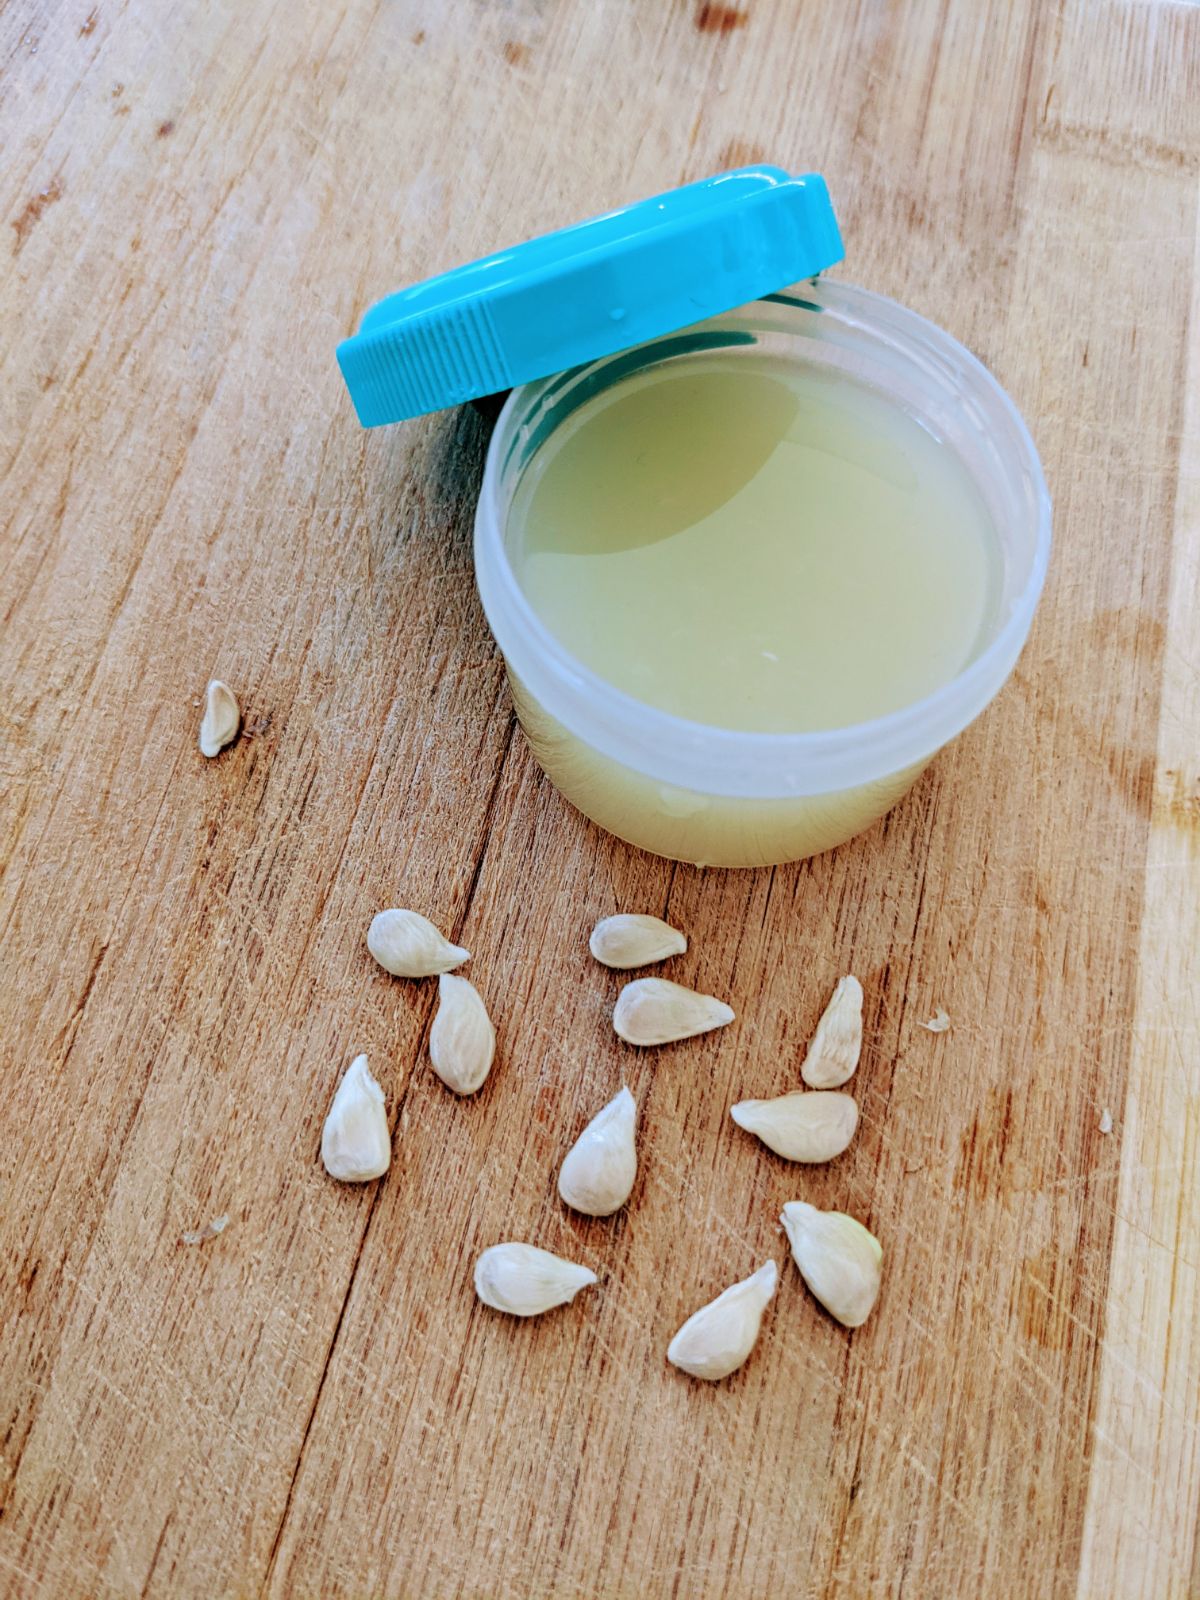 Key lime juice and many seeds on a cutting board